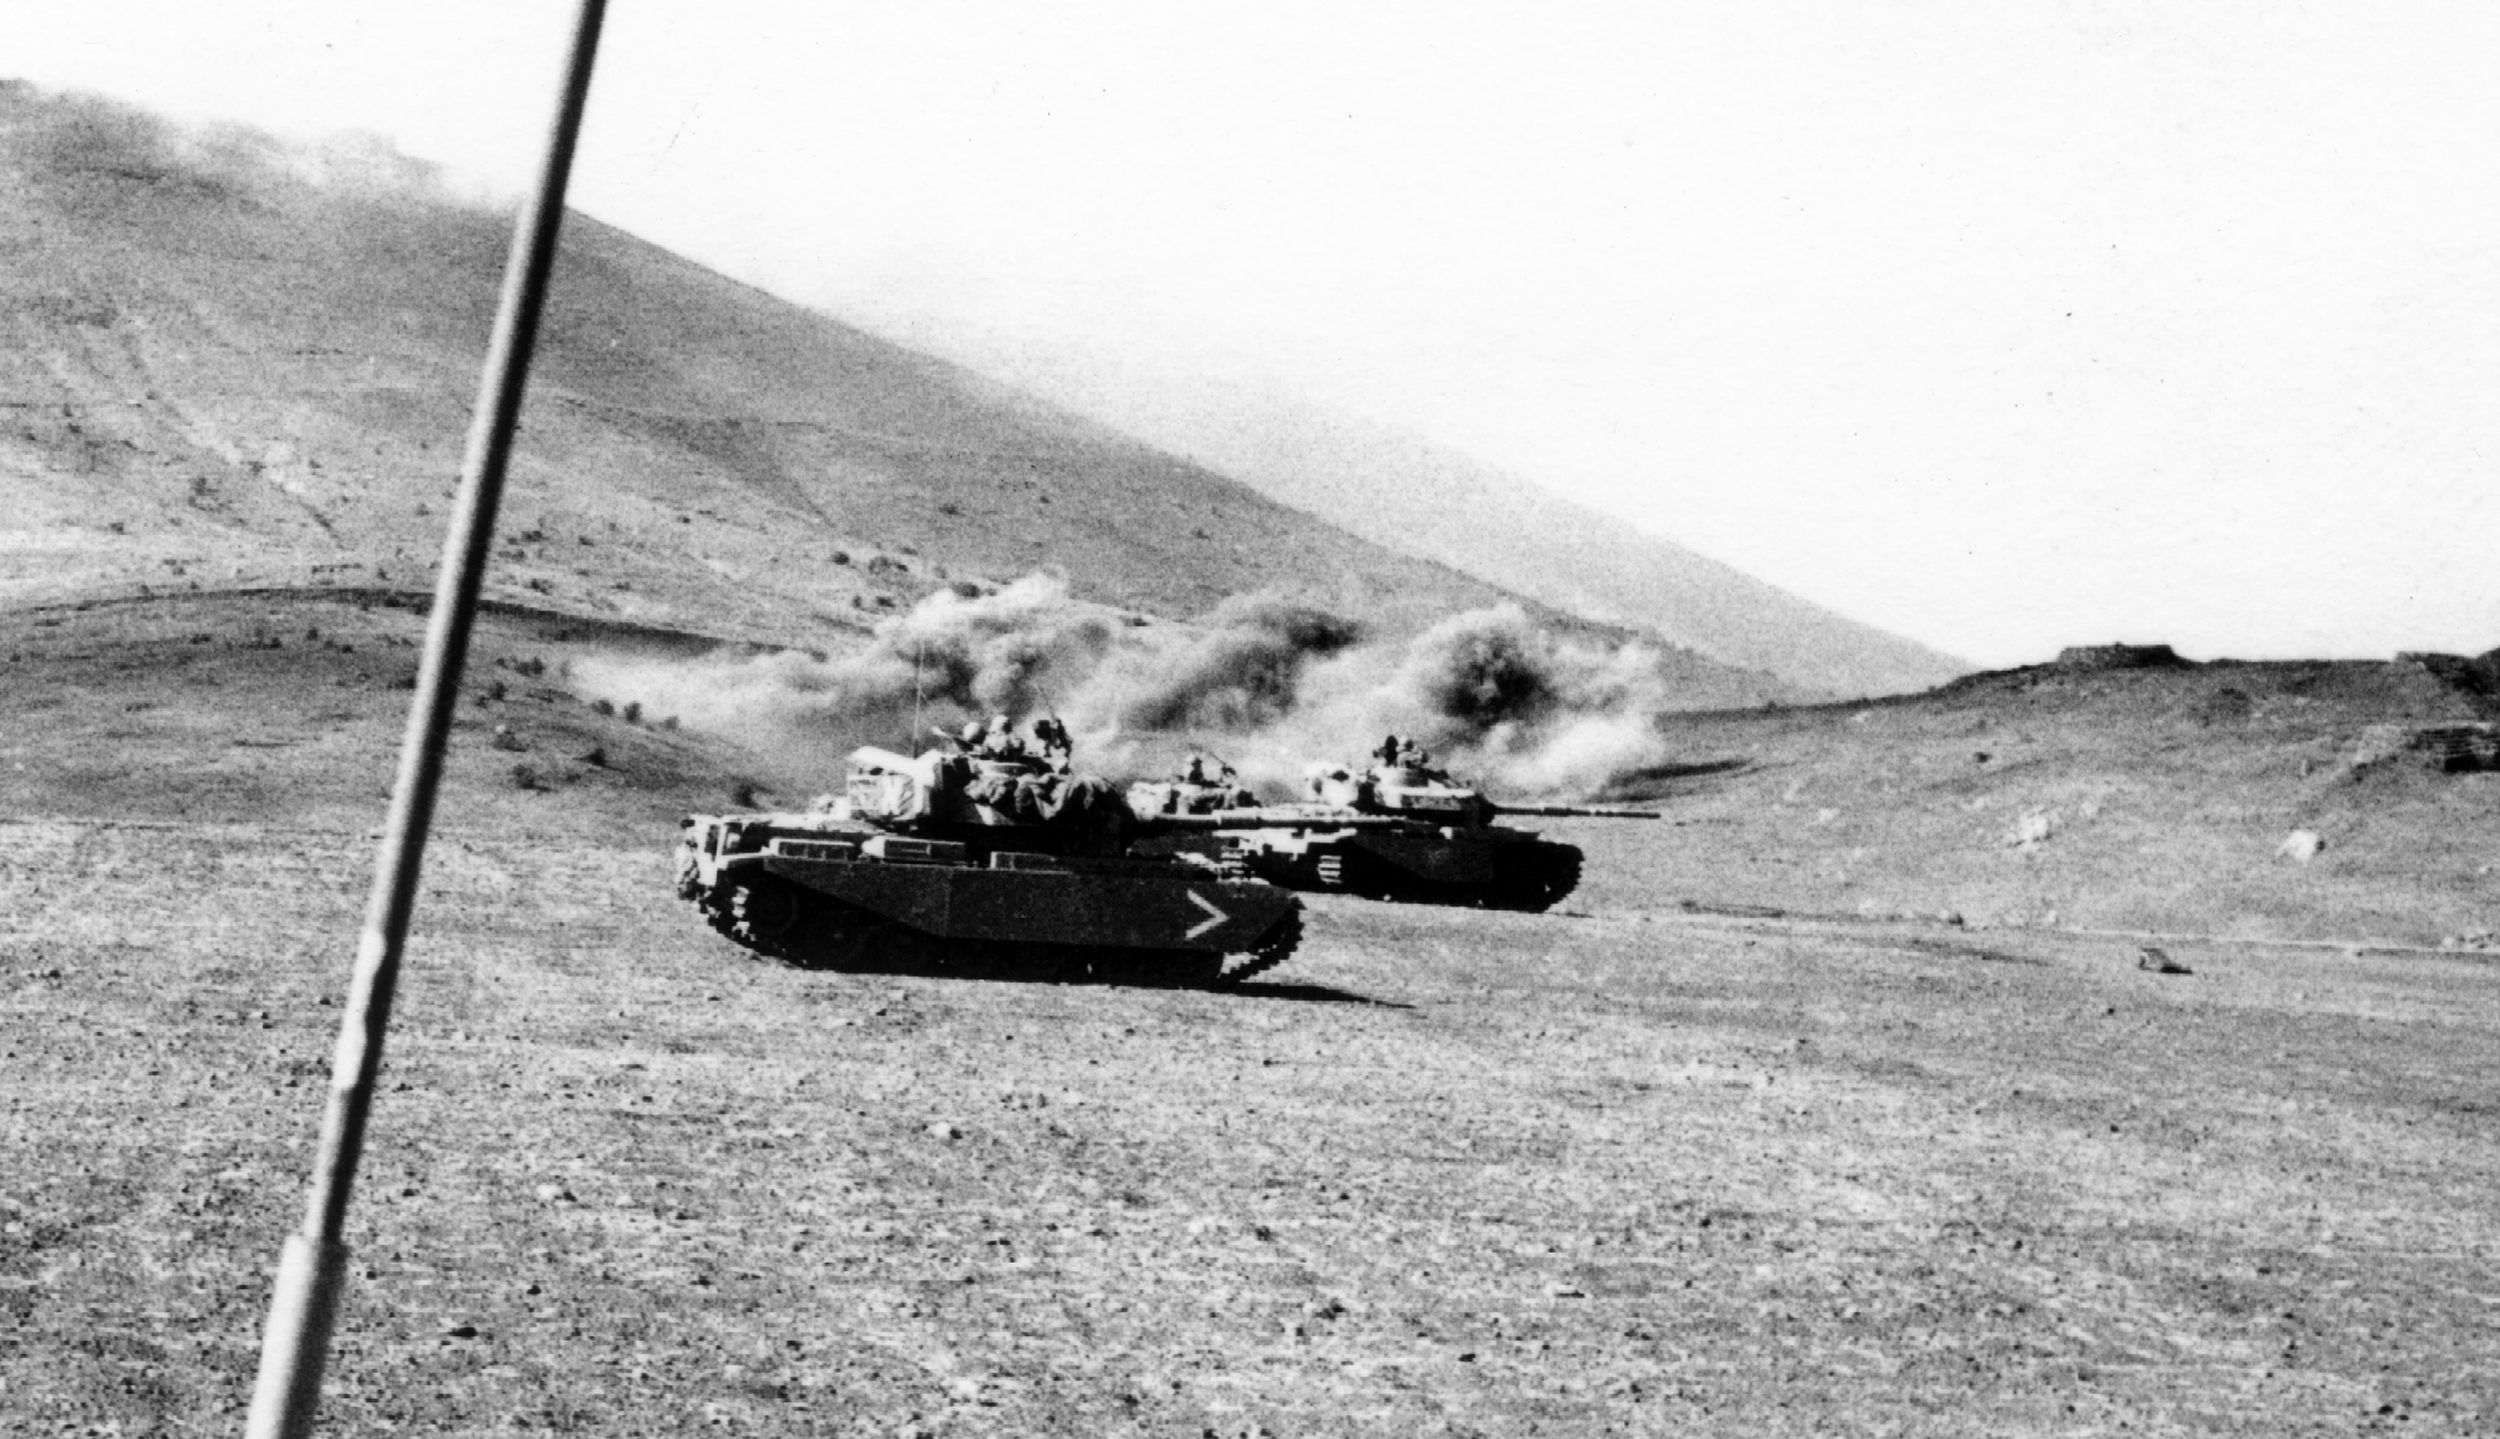 Israeli tanks fire on Syrian troops in the Valley of Tears area of Golan Heights during the Yom Kippur War. With only 177 tanks, Israeli defenders held off a Syrian invasion force with 1,400 tanks long enough for reinforcements to arrive. The Sho’t Kal’s (Centurion main battle tank) superiority over the Soviet T-55s and T-62s fielded by the Syrians, was an important factor in their success. 